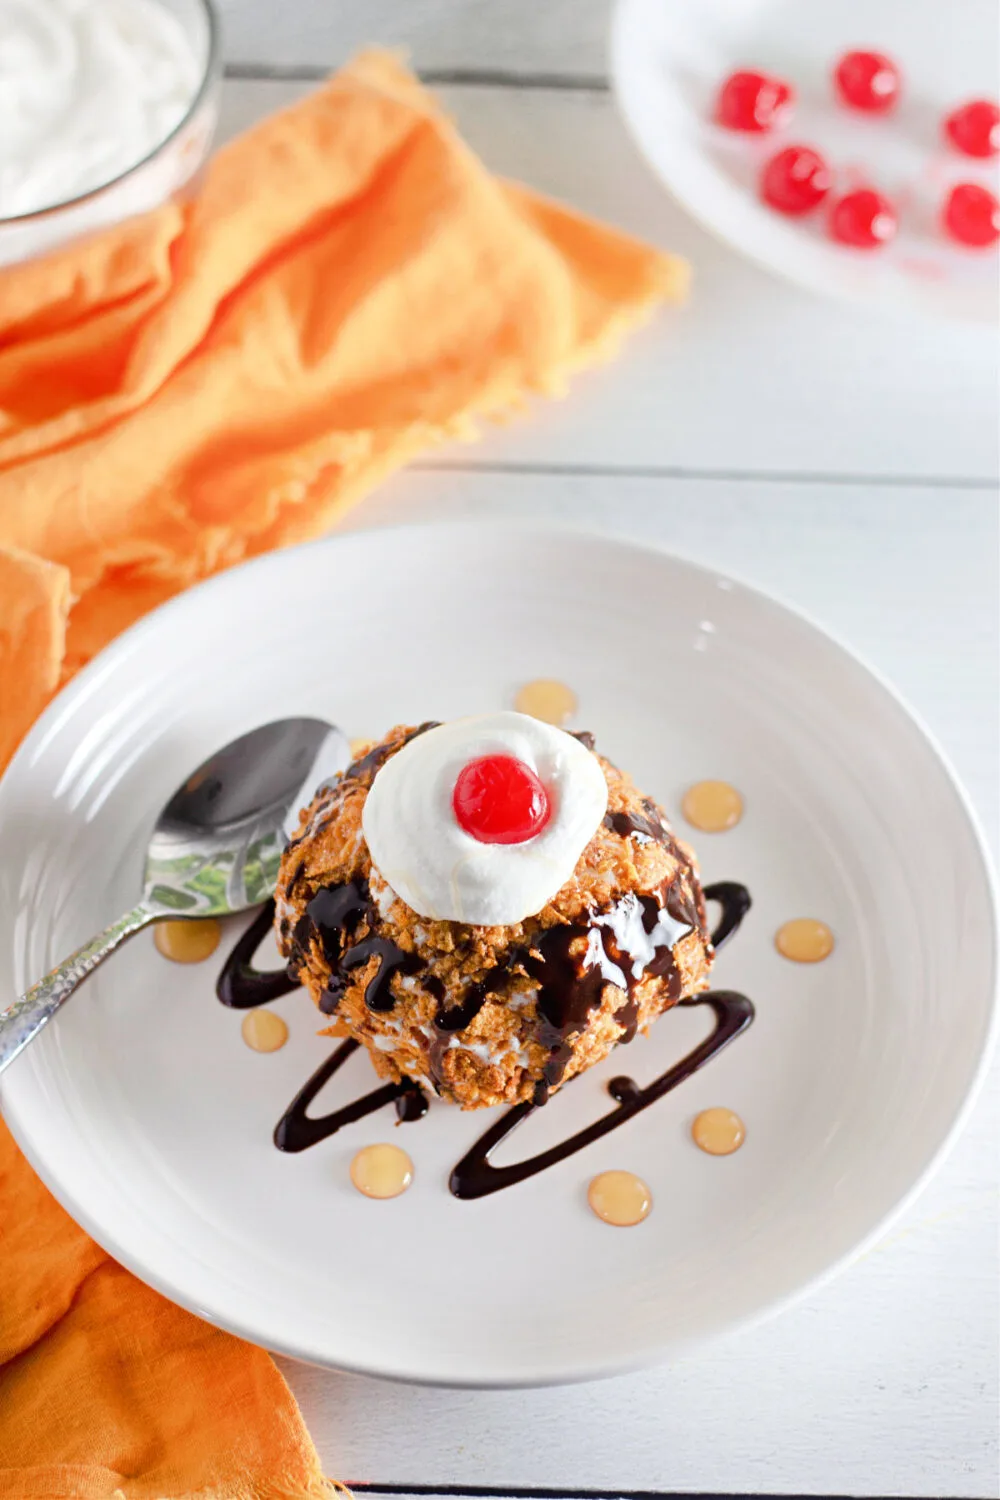 Fried ice cream on a plate with cherries, chocolate syrup, and caramel sauce. 